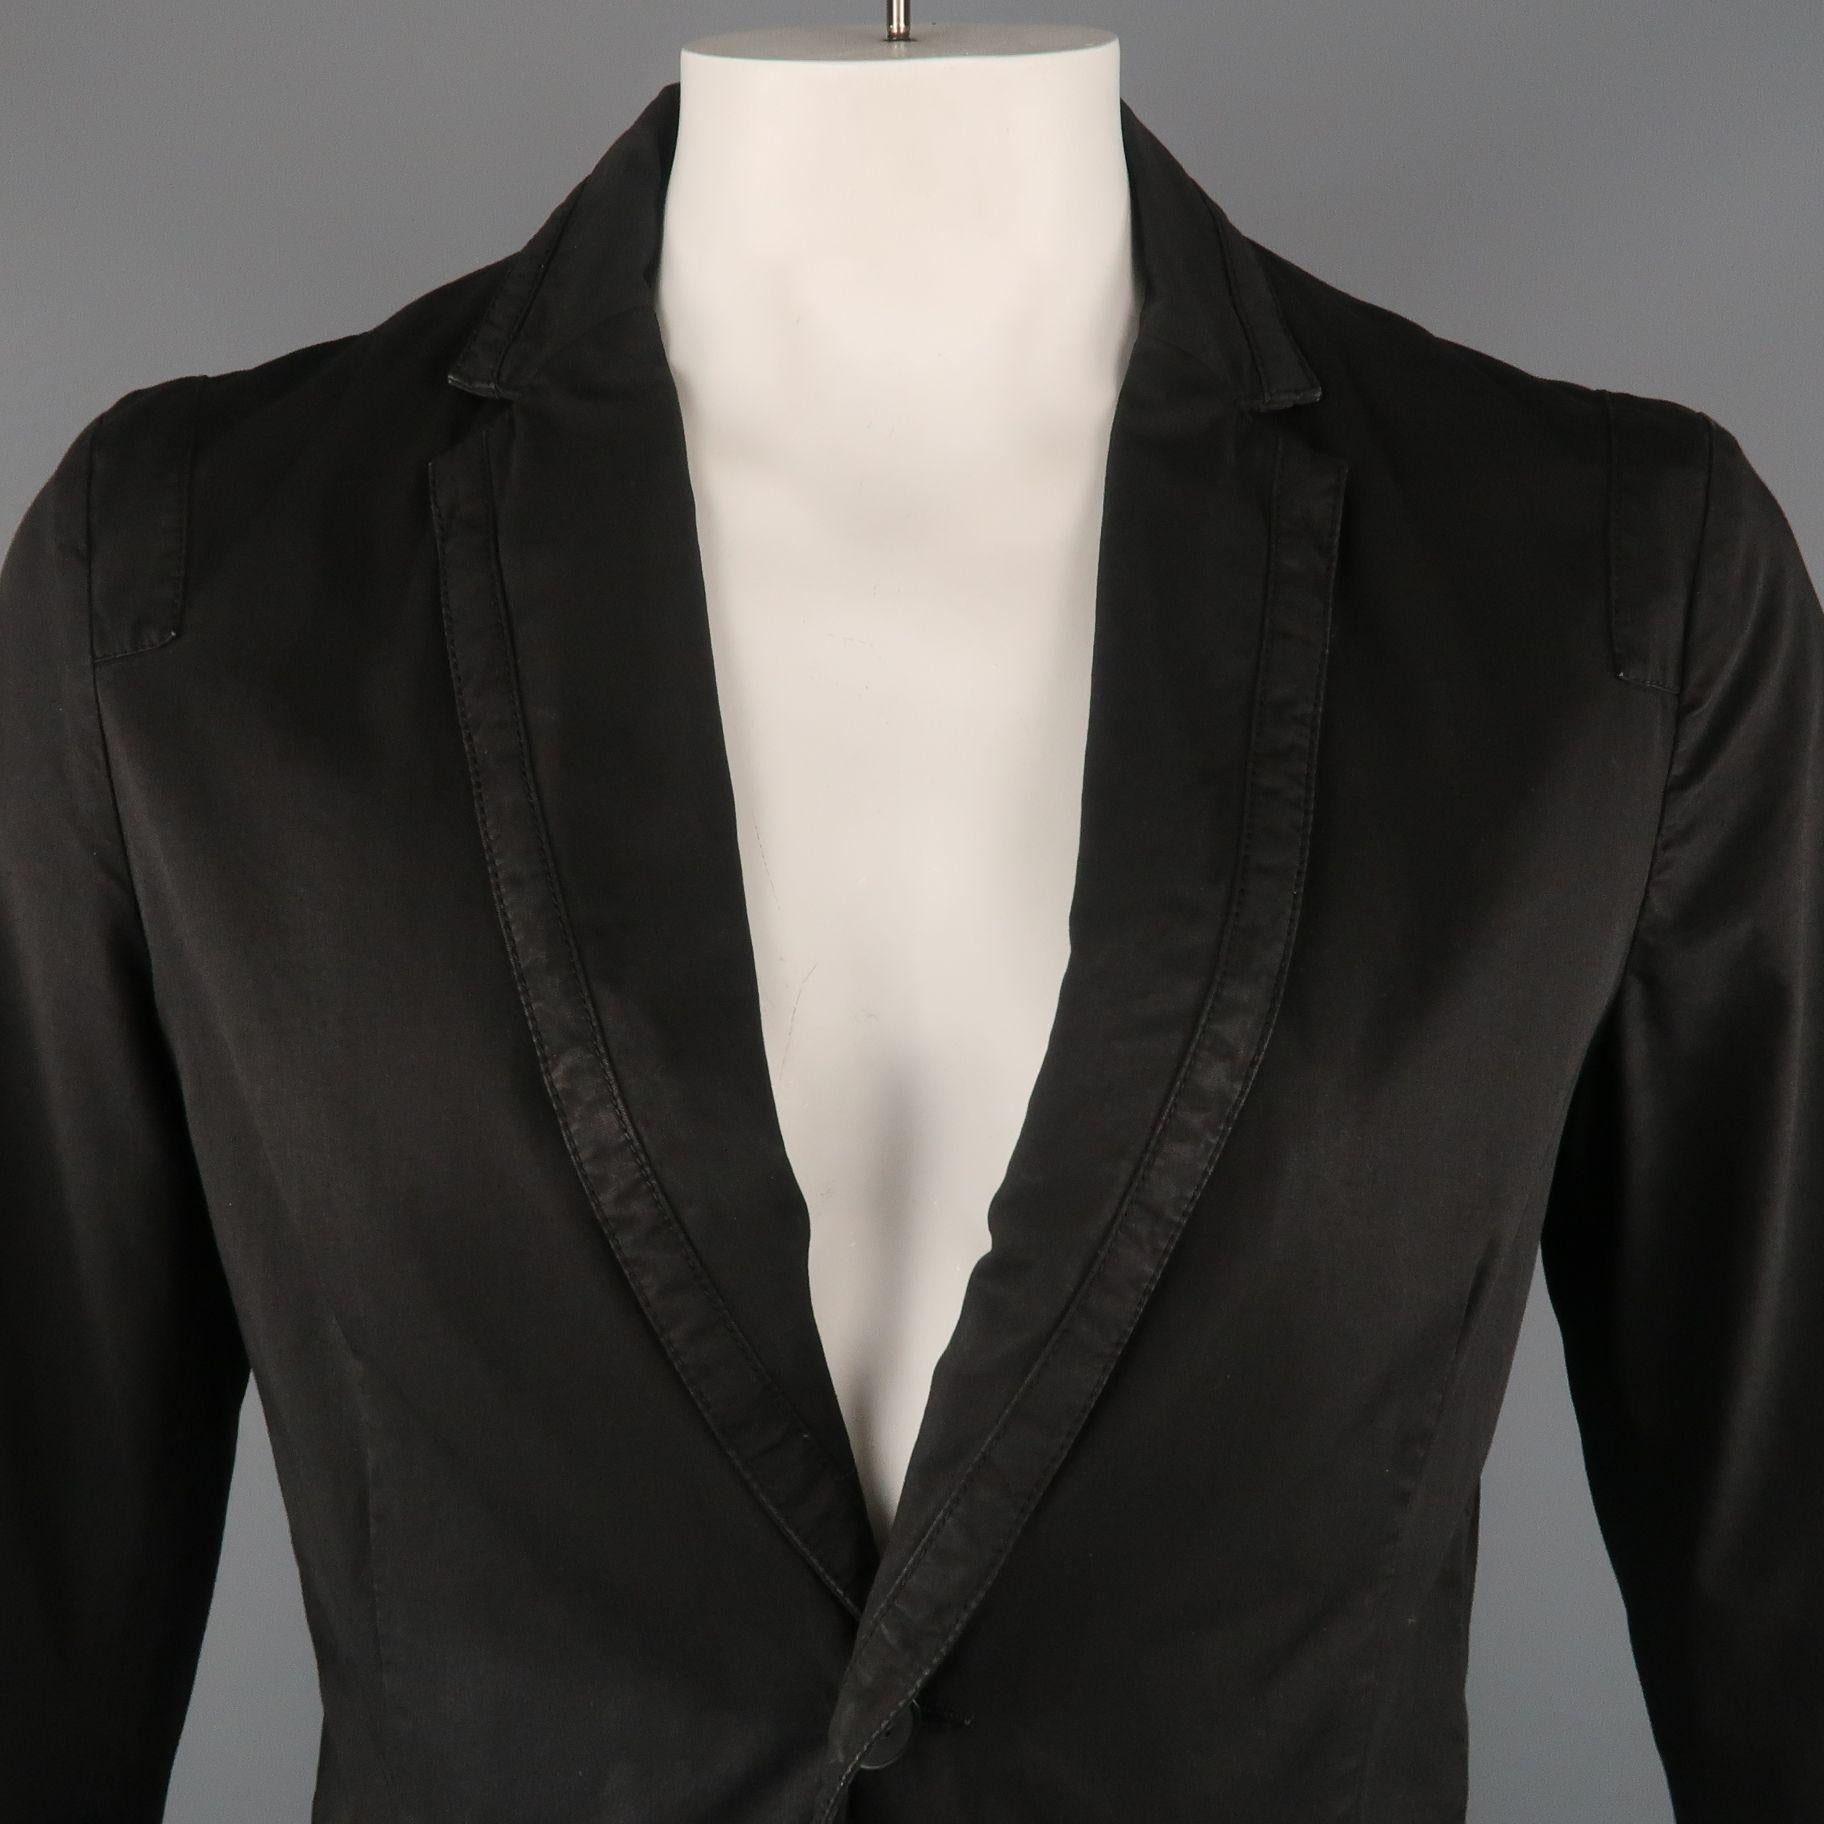 KENZO sport coat comes in a black cotton featuring a notch lapel style, two button closure, and front flap pockets.
 
Very Good Pre-Owned Condition.
Marked: L
 
Measurements:
 
Shoulder: 20 in.
Chest: 42 in.
Sleeve: 22.5 in.
Length: 29 in.